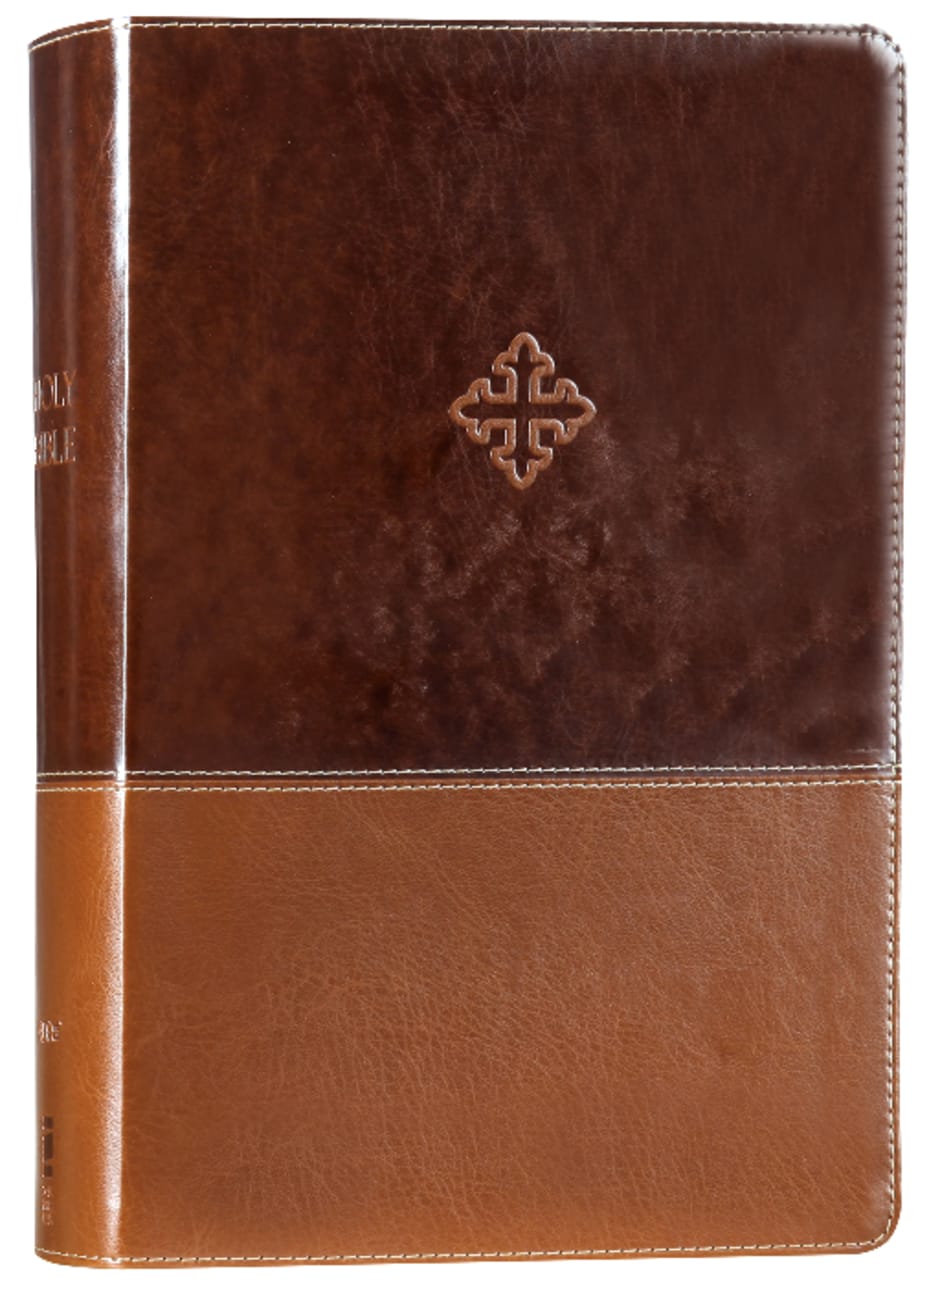 Amplified Study Bible Brown (Black Letter Edition) Premium Imitation Leather